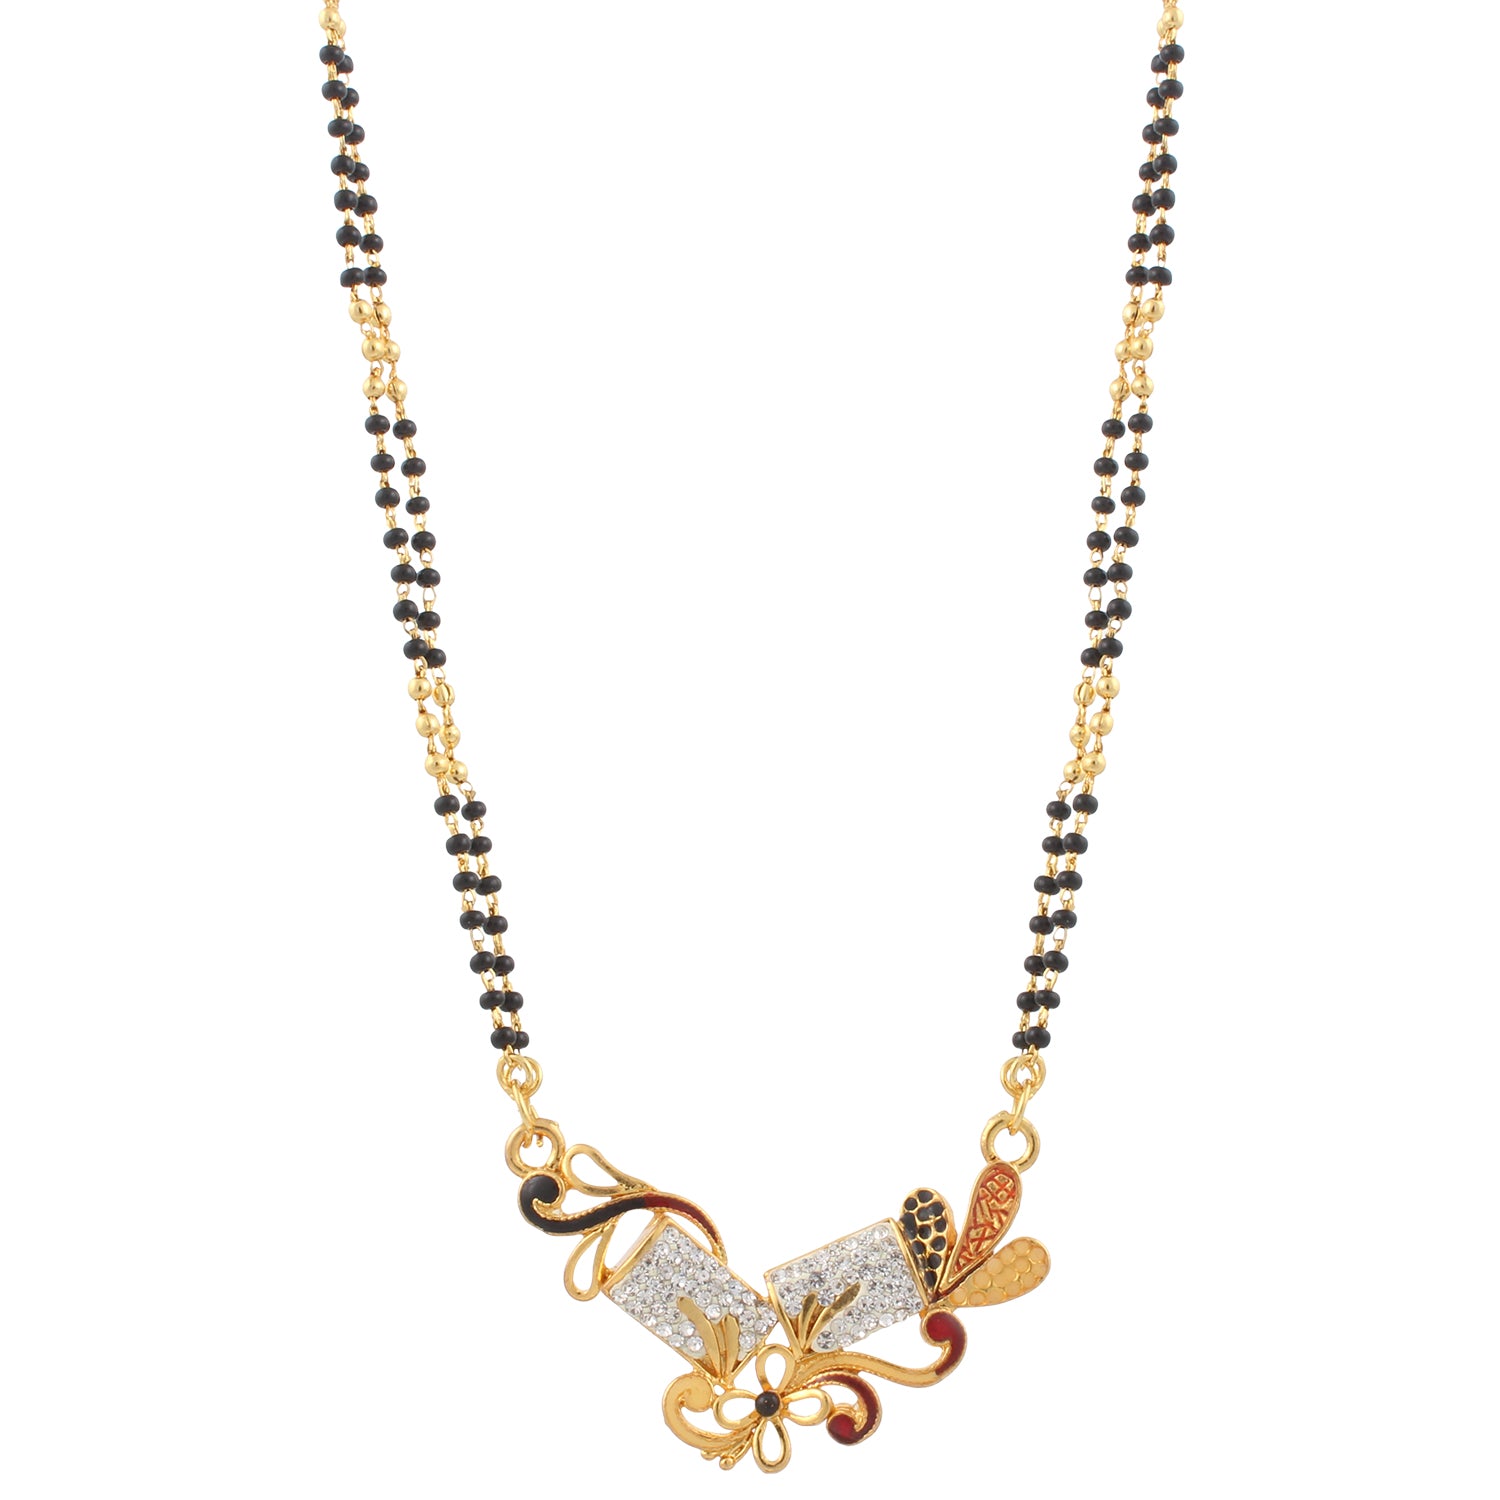 Floral Design Mangalsutra with Gold Plating